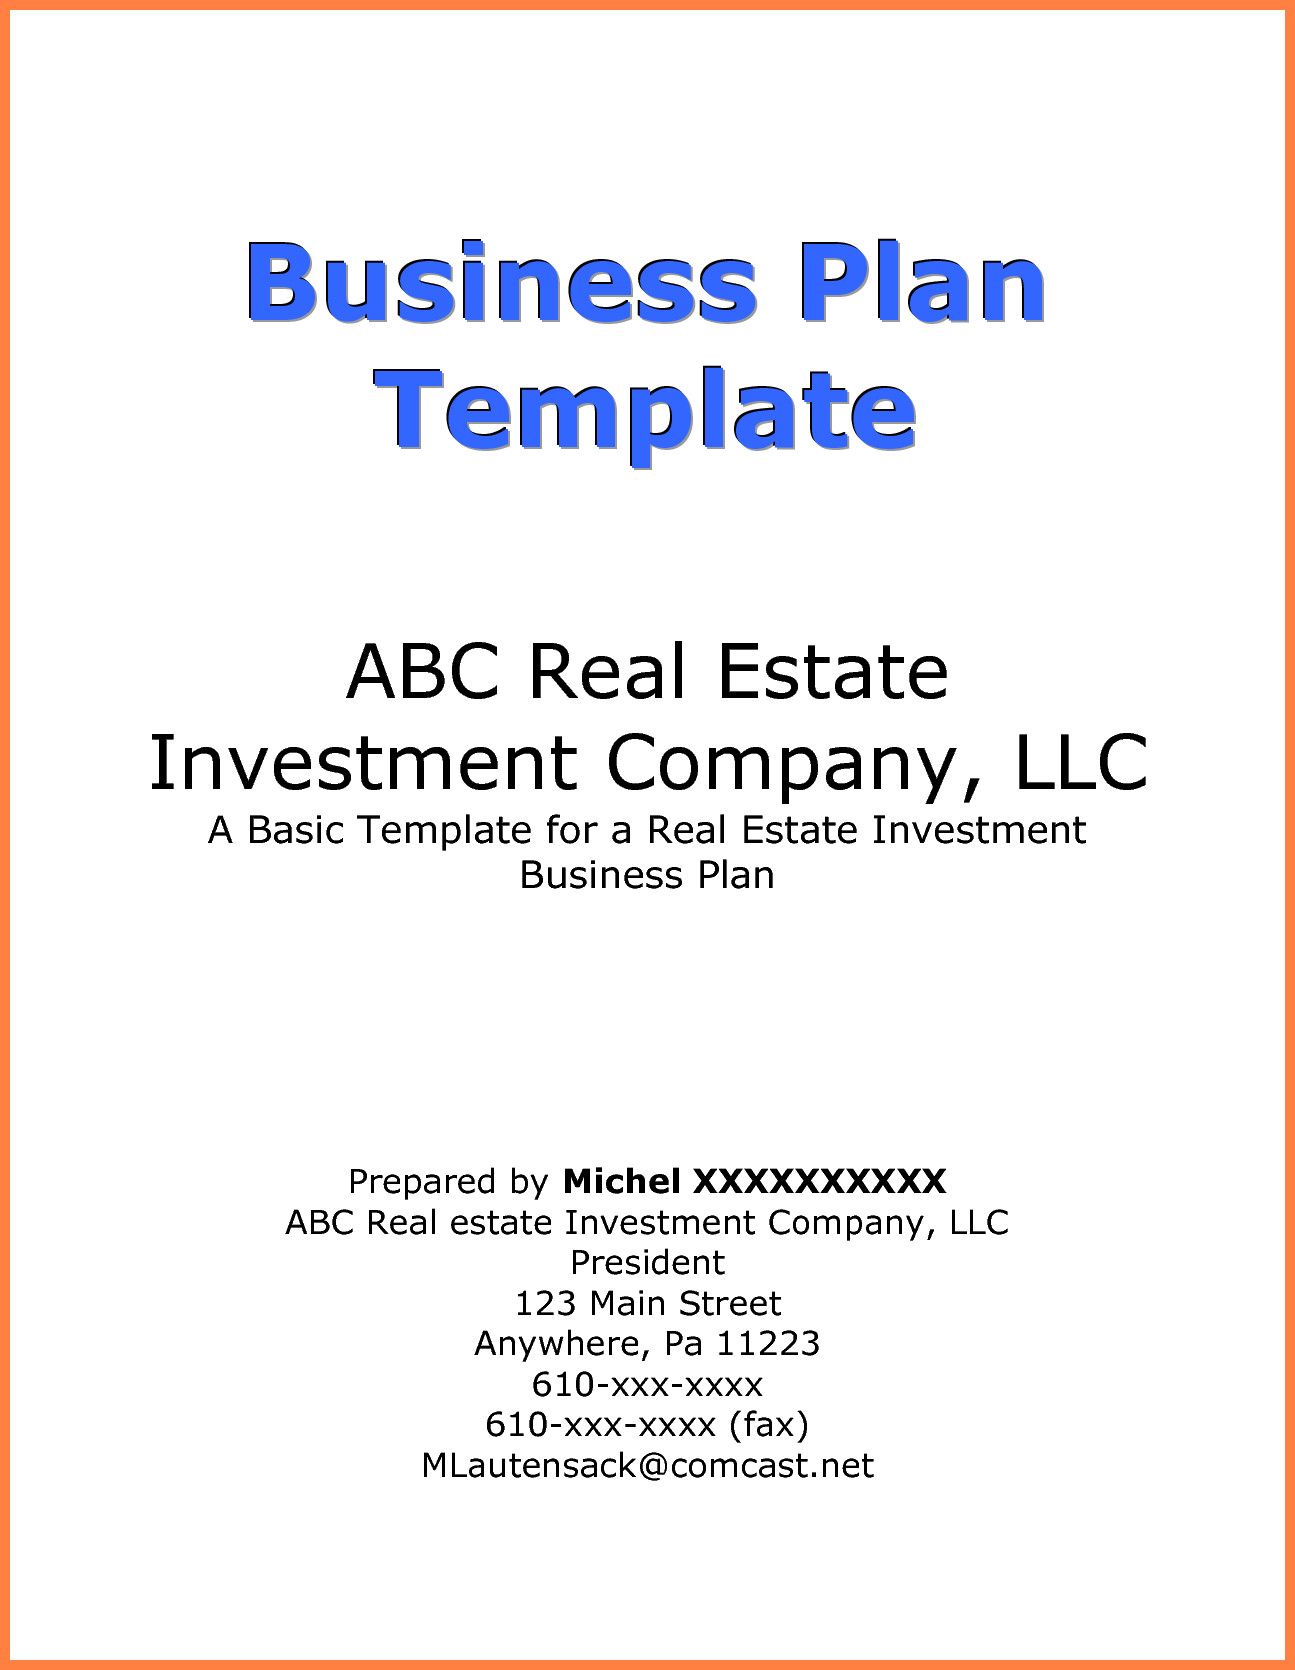 Business Plan Cover Page Template Inspirational Business Plan Cover Page Examp Business Plan Template Free Business Plan Template Simple Business Plan Template